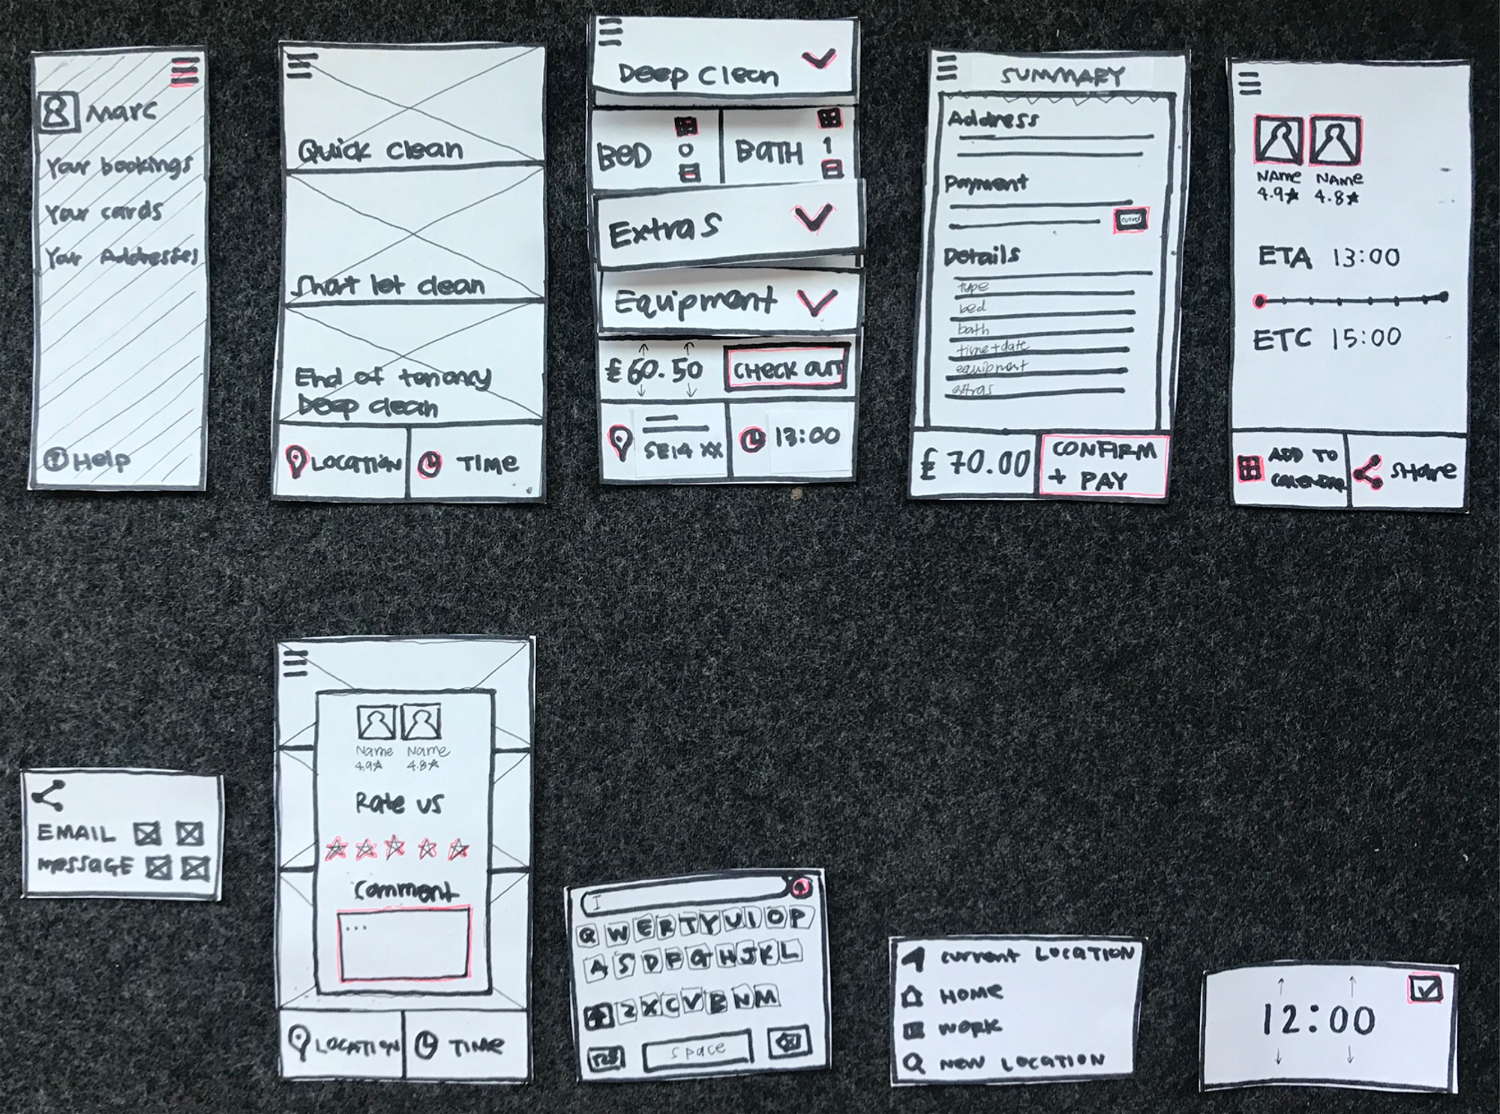 Paper Prototype, left to right — menu bar, services, requirements, summary, tracking, add to cal pop-up, confirmation, keyboard, location, time